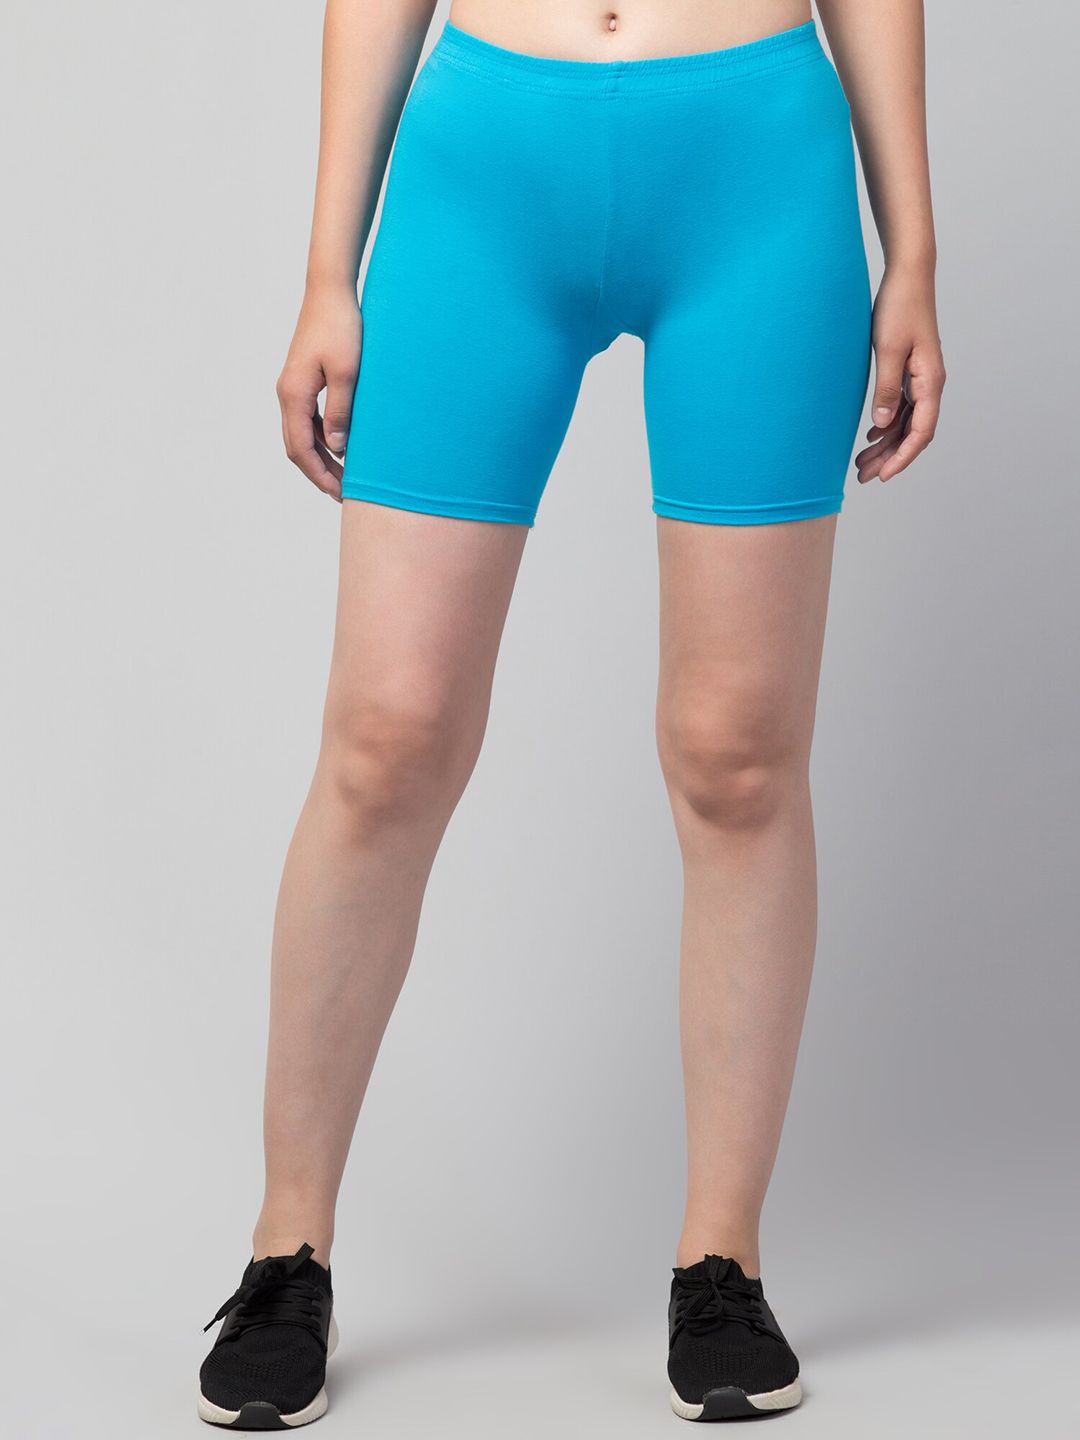 Apraa & Parma Women Blue Cycling Sports Shorts Price in India